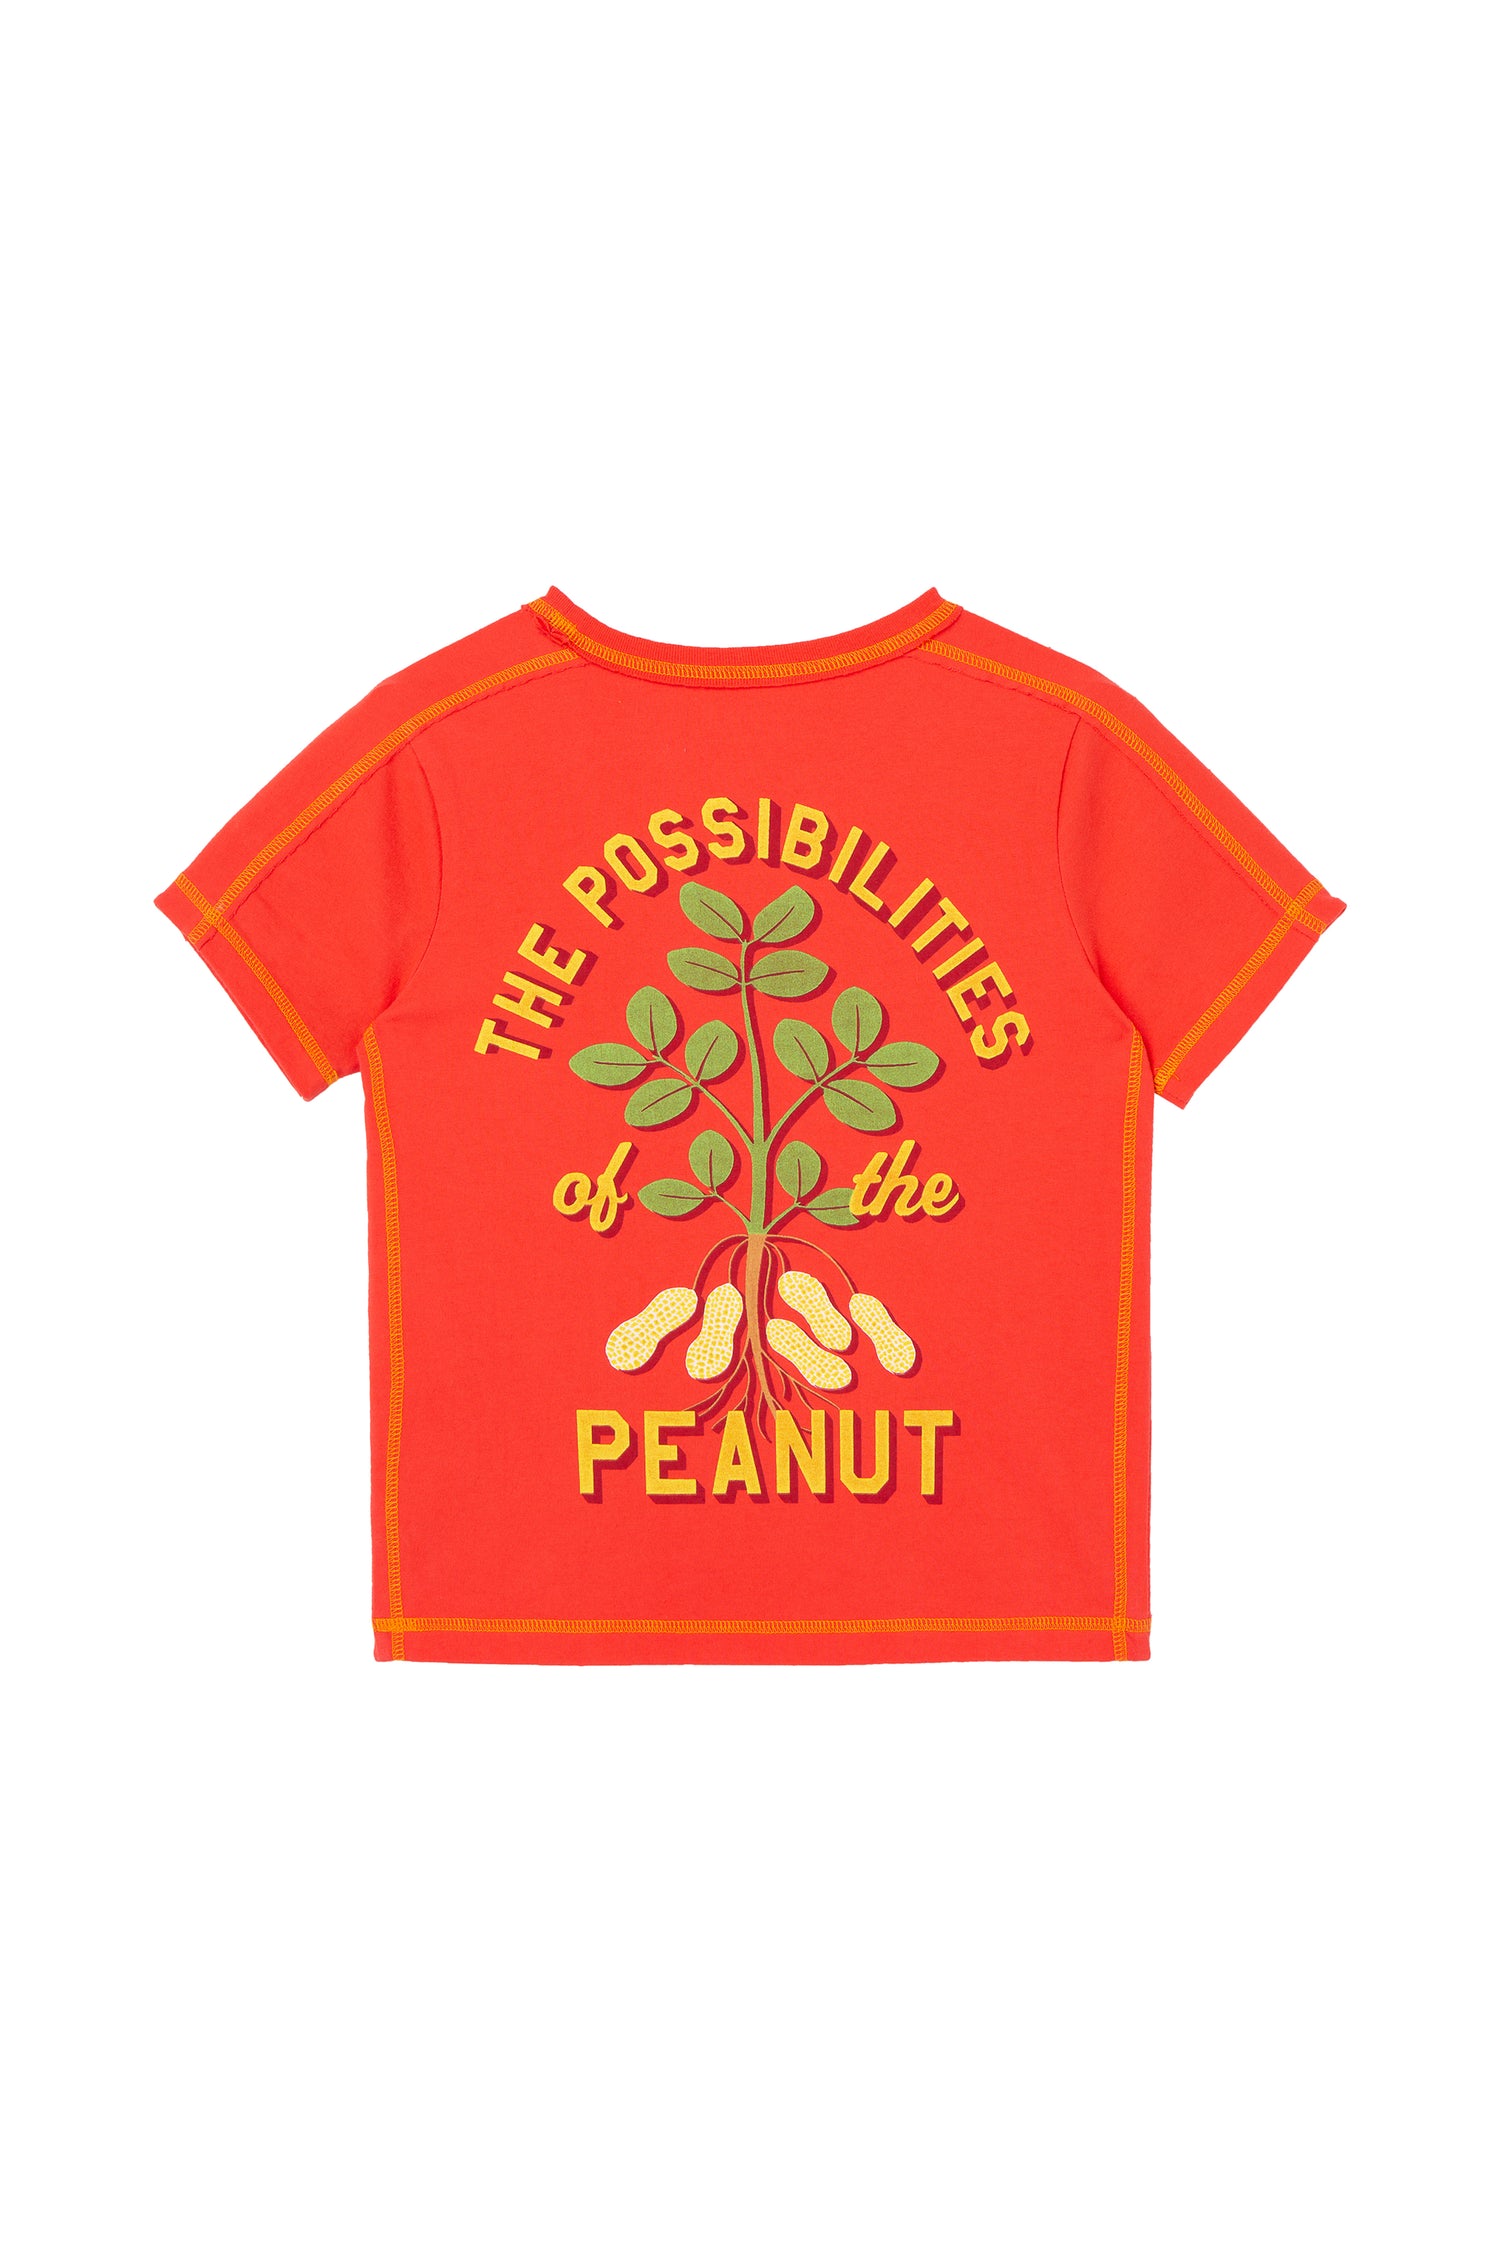 BACK OF ORANGE T-SHIRT WITH "THE POSSIBILITIES OF PEANUTS"